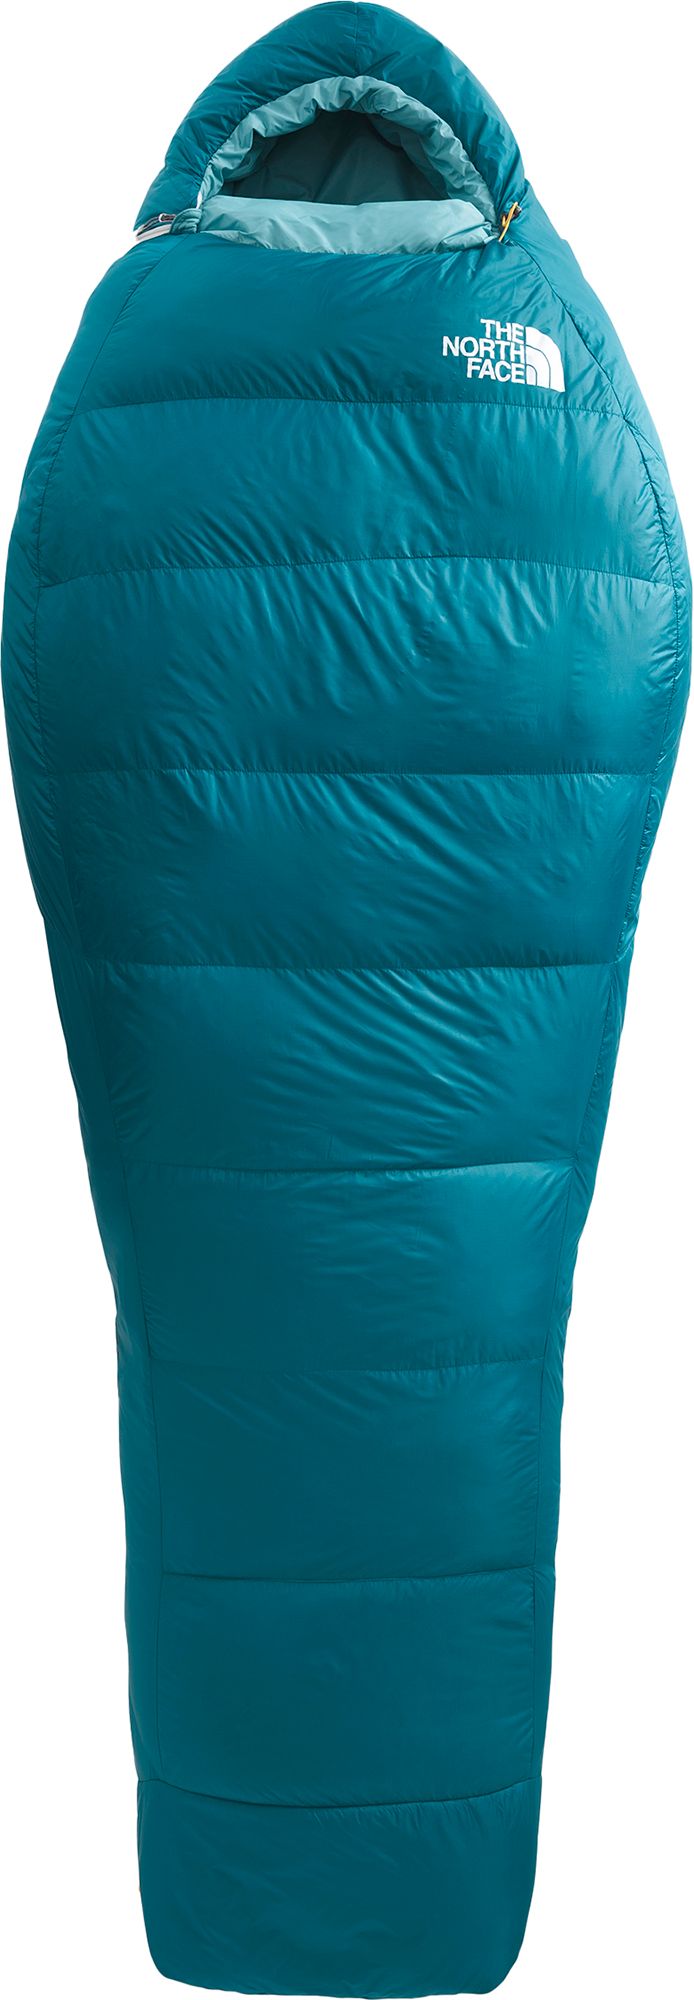 Photos - Suitcase / Backpack Cover The North Face Trail Lite Down 20 Sleeping Bag, Men's, Regular, Blue Coral 